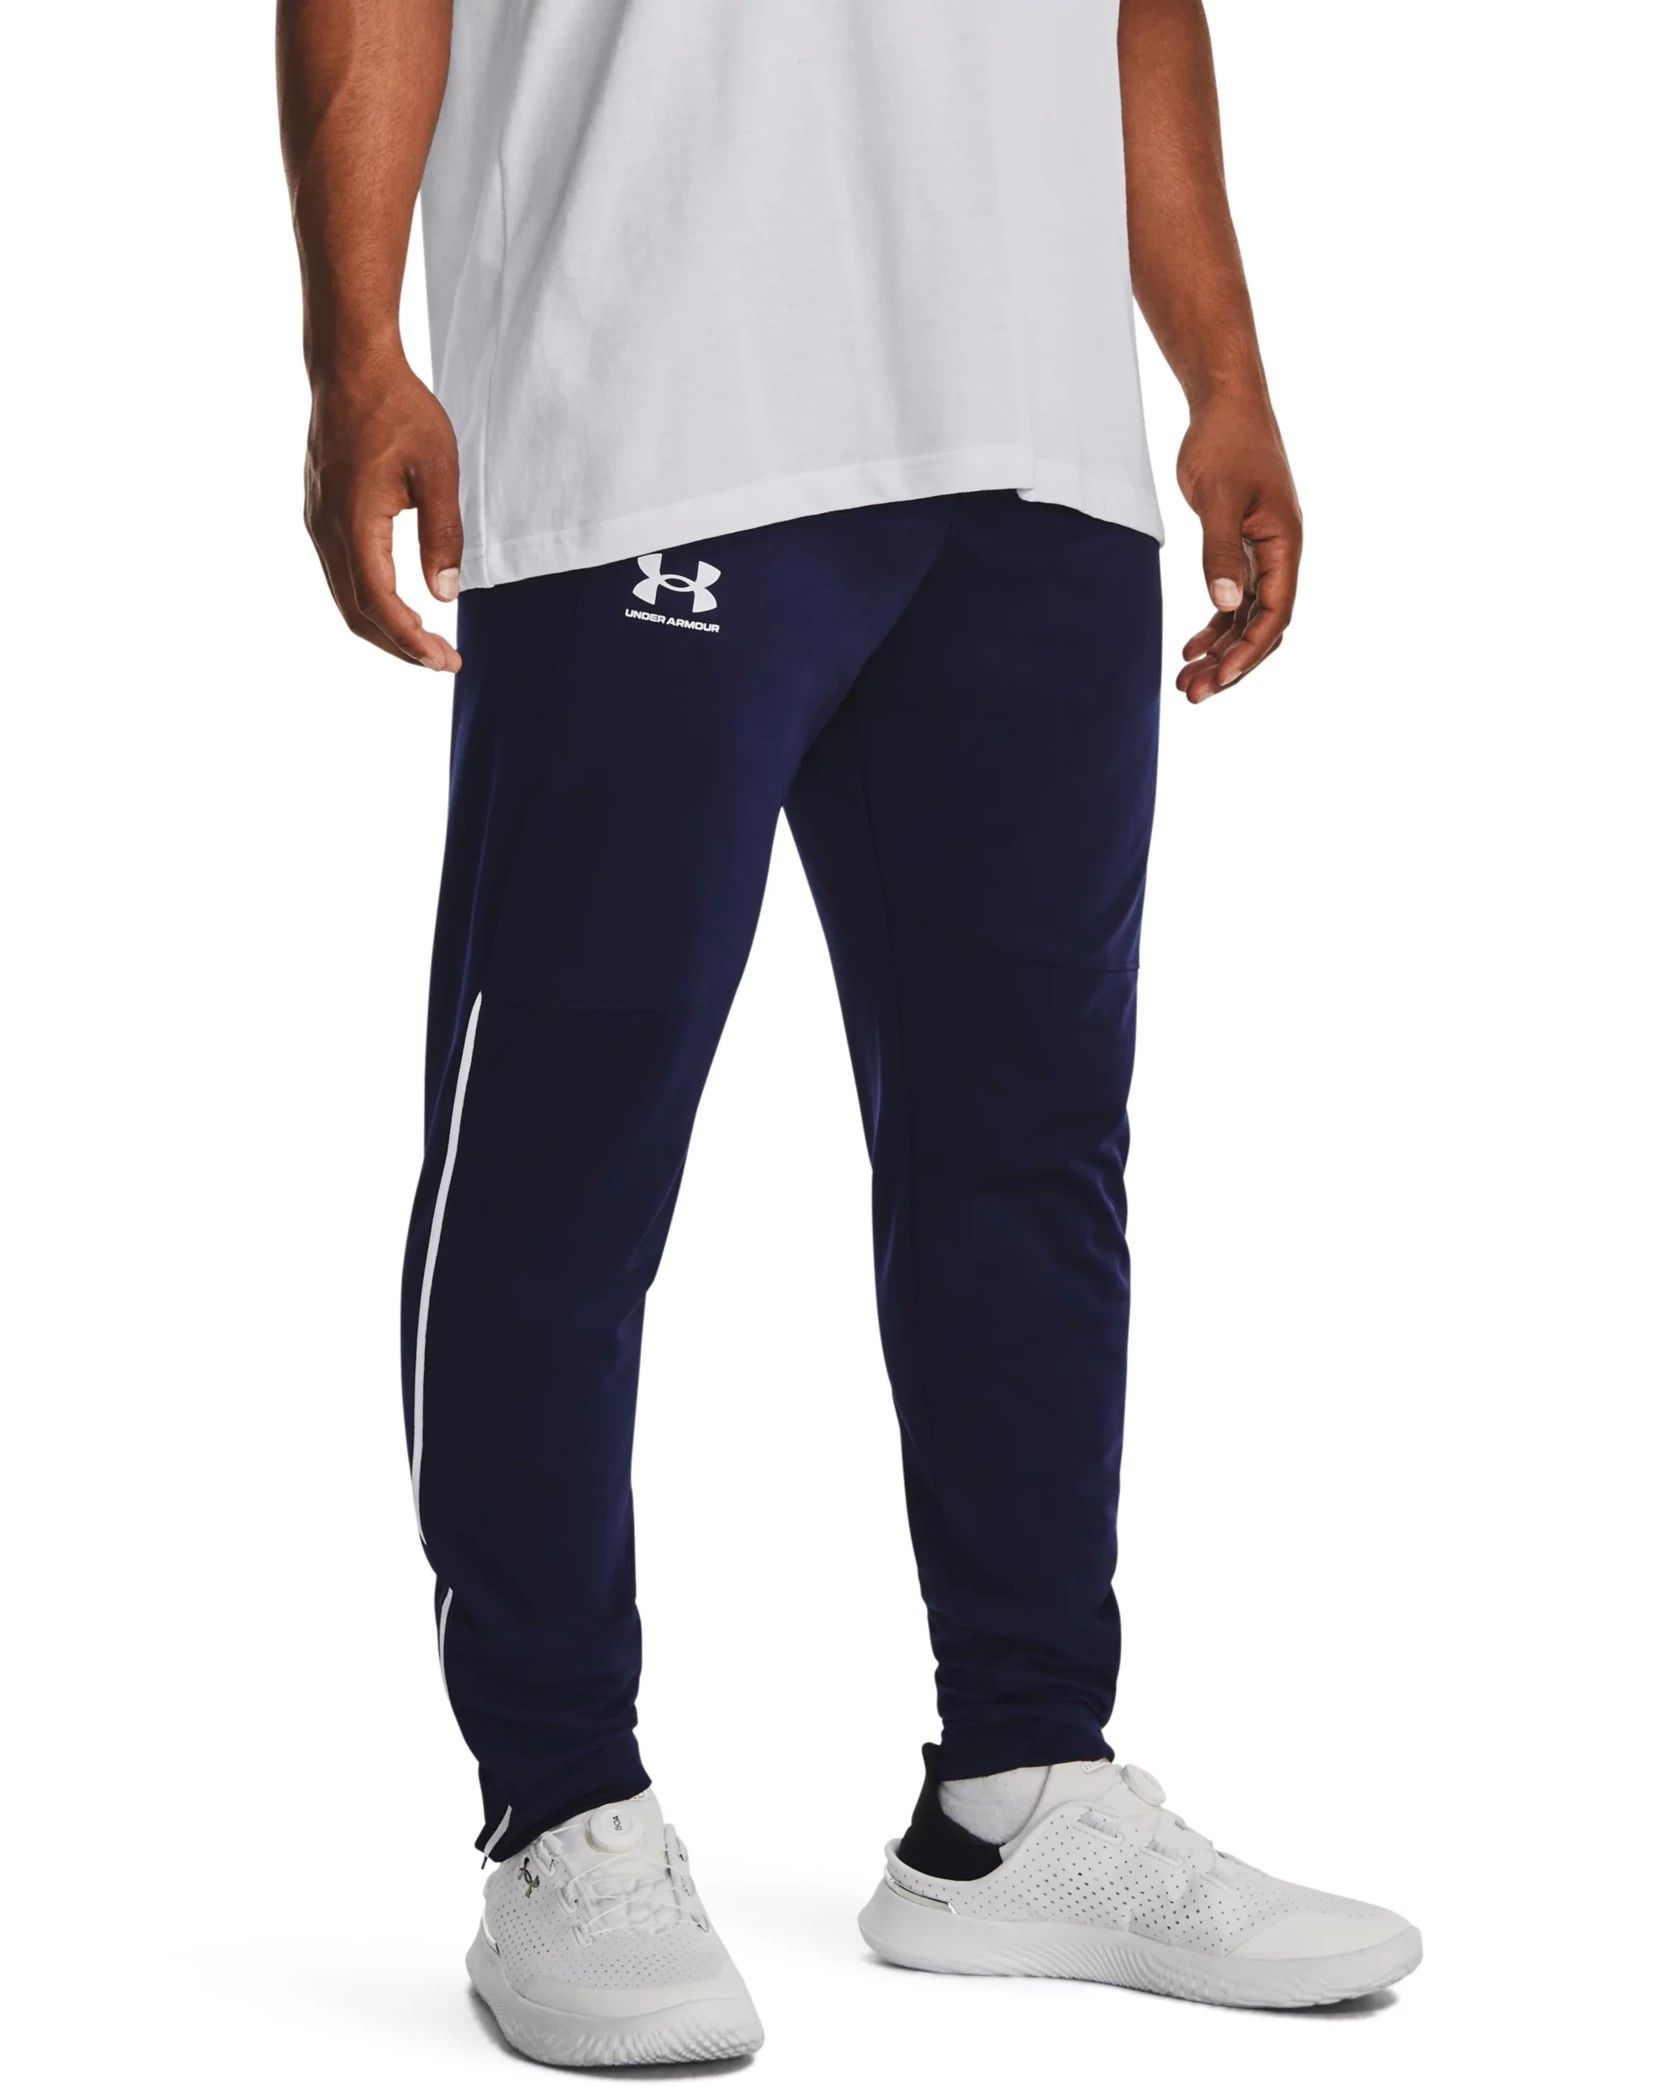 Order Online UA Pique Track Pants From Under Armour India | Buy Now